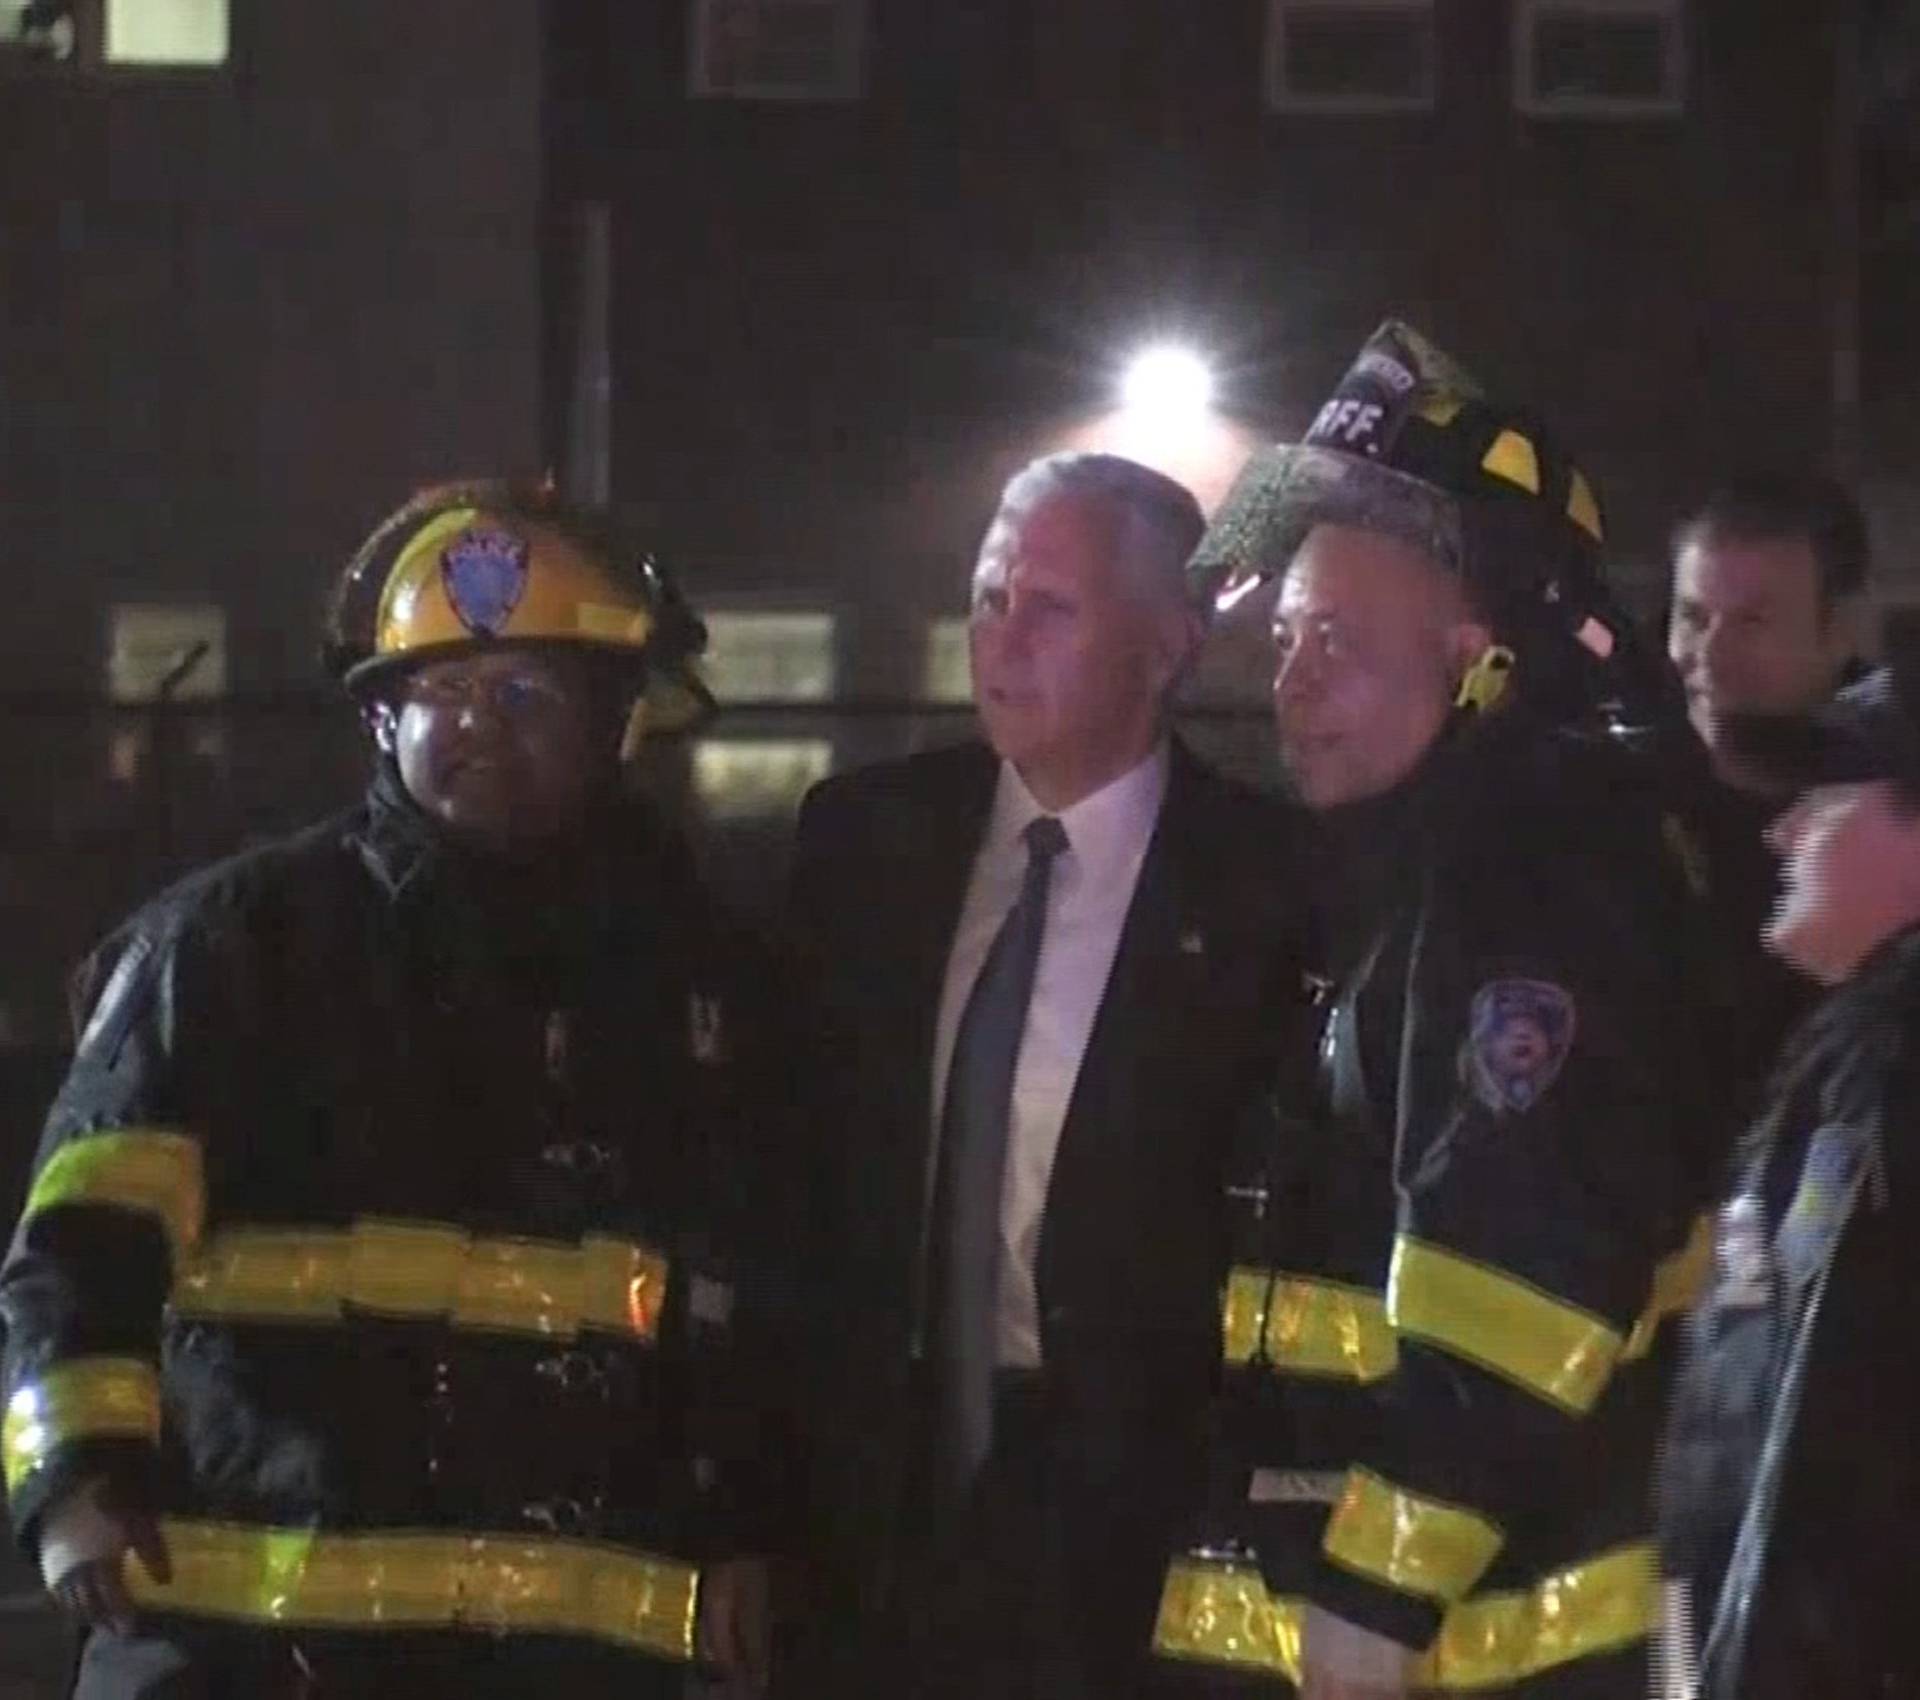 Still image of U.S. Republican vice presidential nominee Pence posing for a photo with firefighters after a plane carrying him skidded off the runway after landing in the rain at New York City's LaGuardia Airport